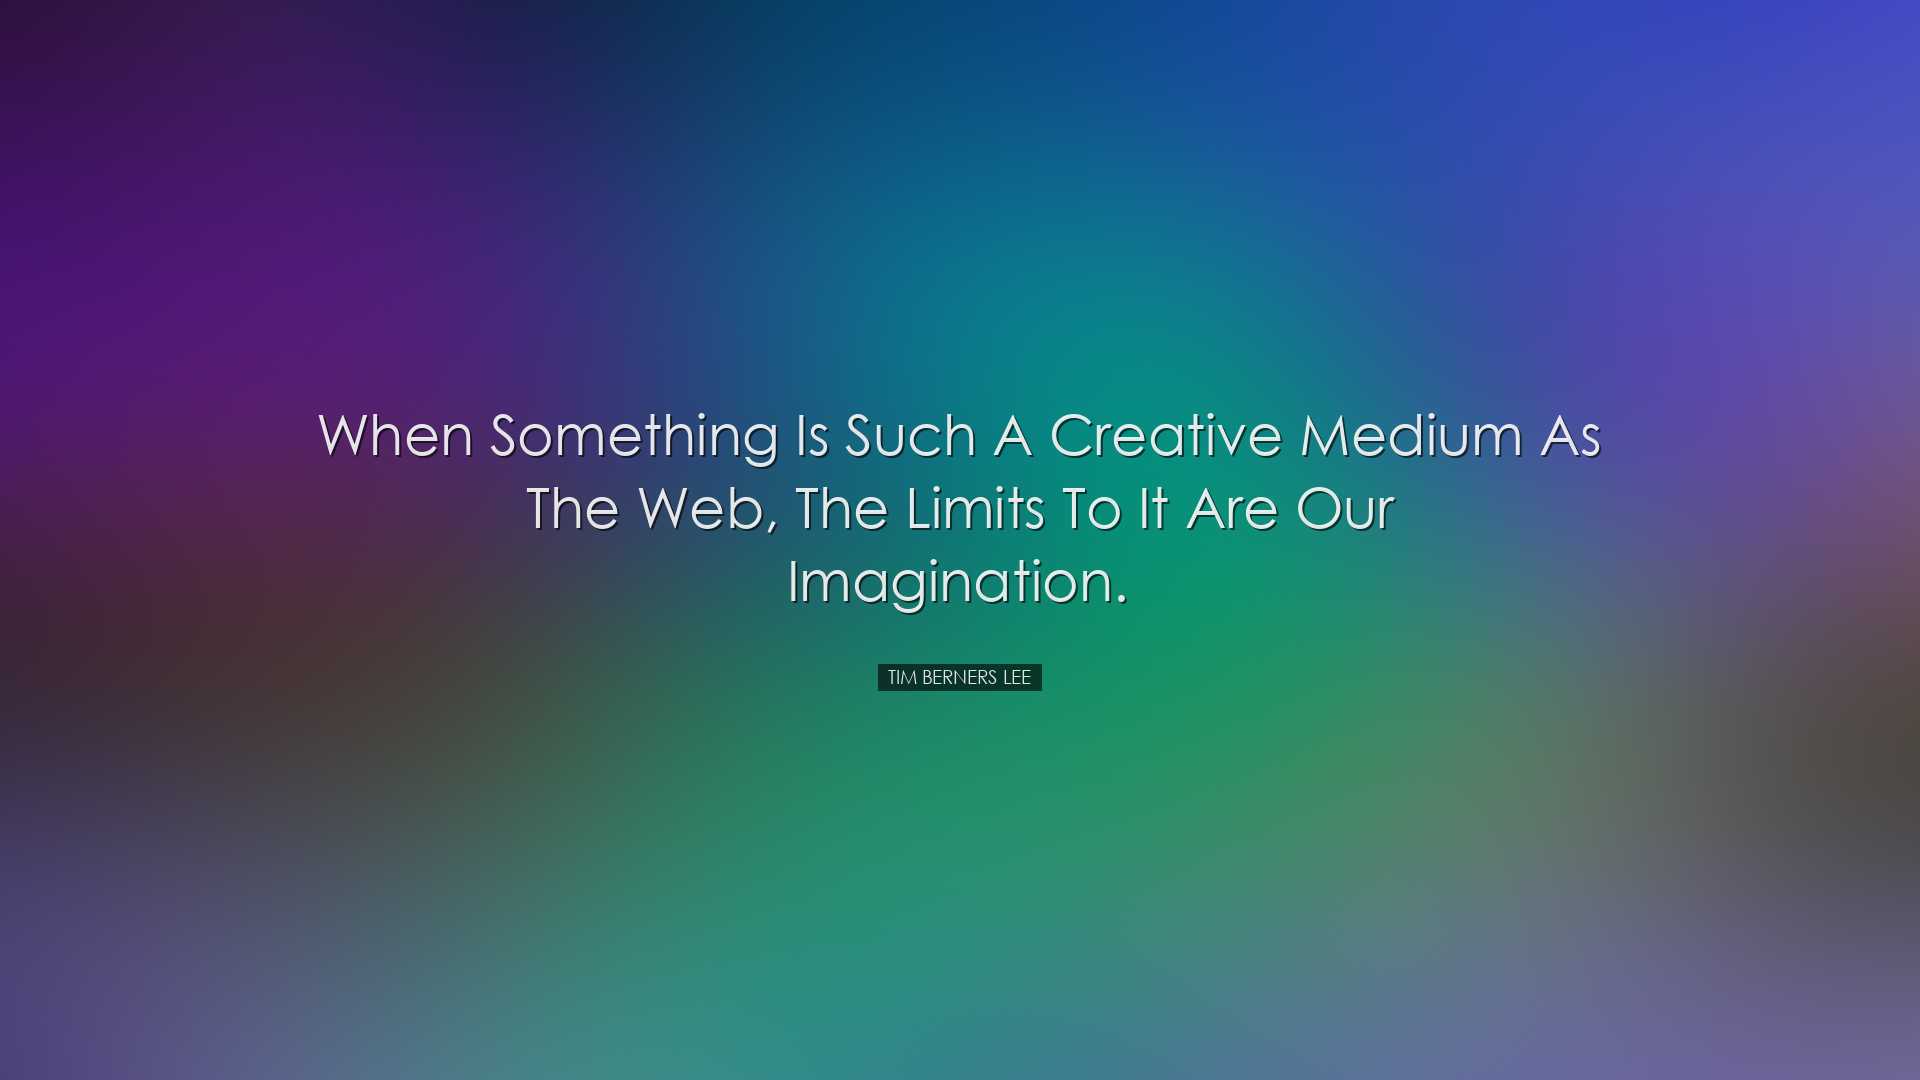 When something is such a creative medium as the web, the limits to